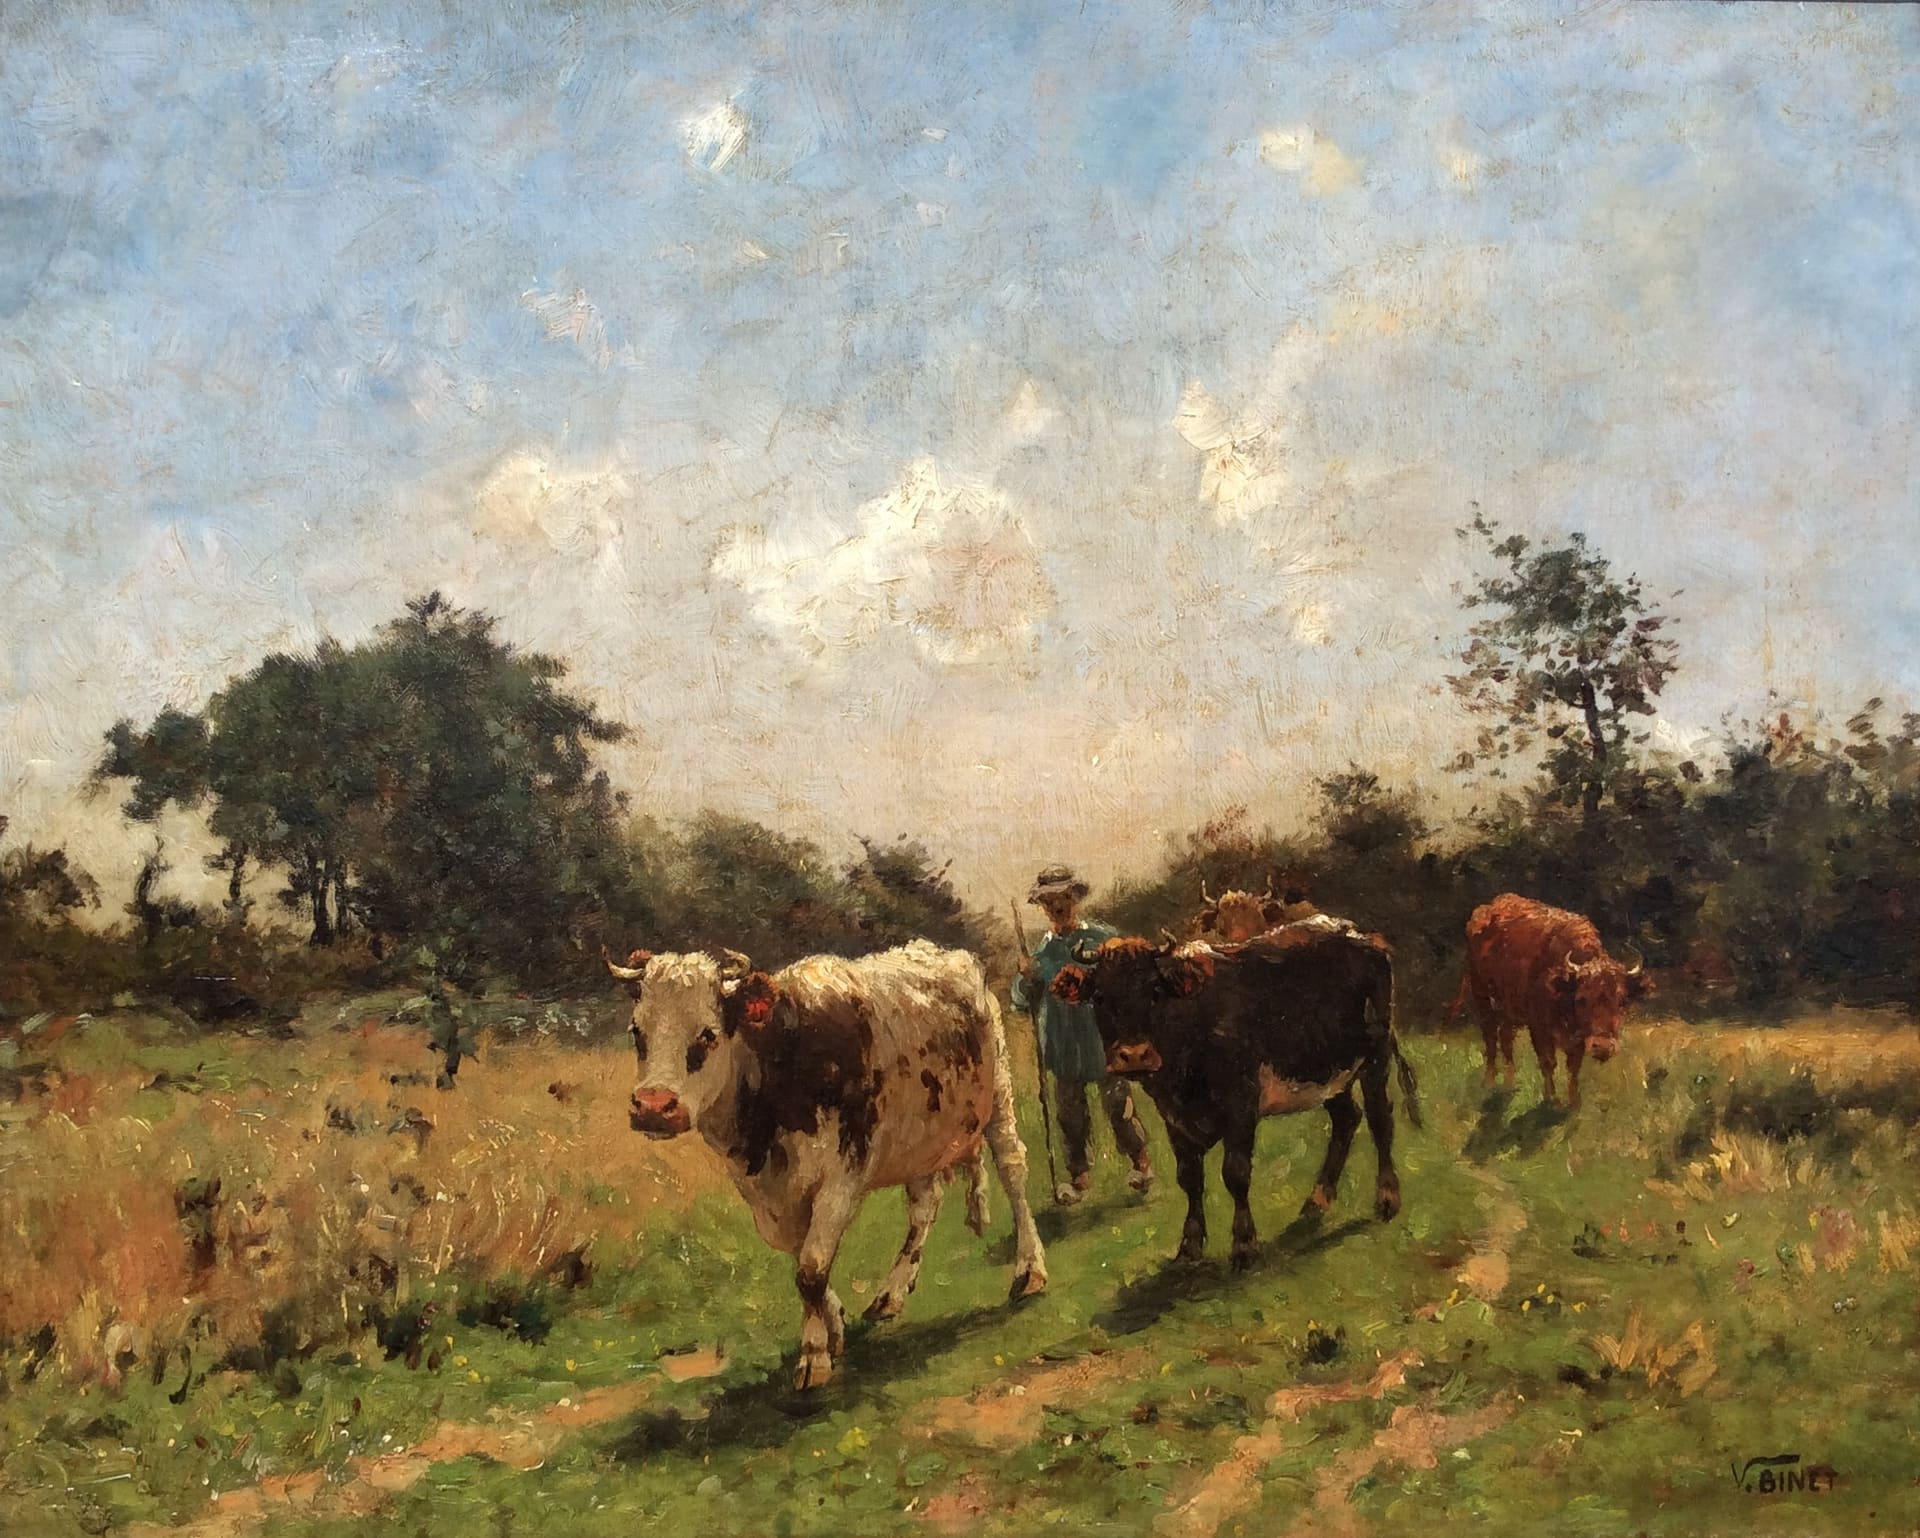 “Farmer with Cattle Returning Home”